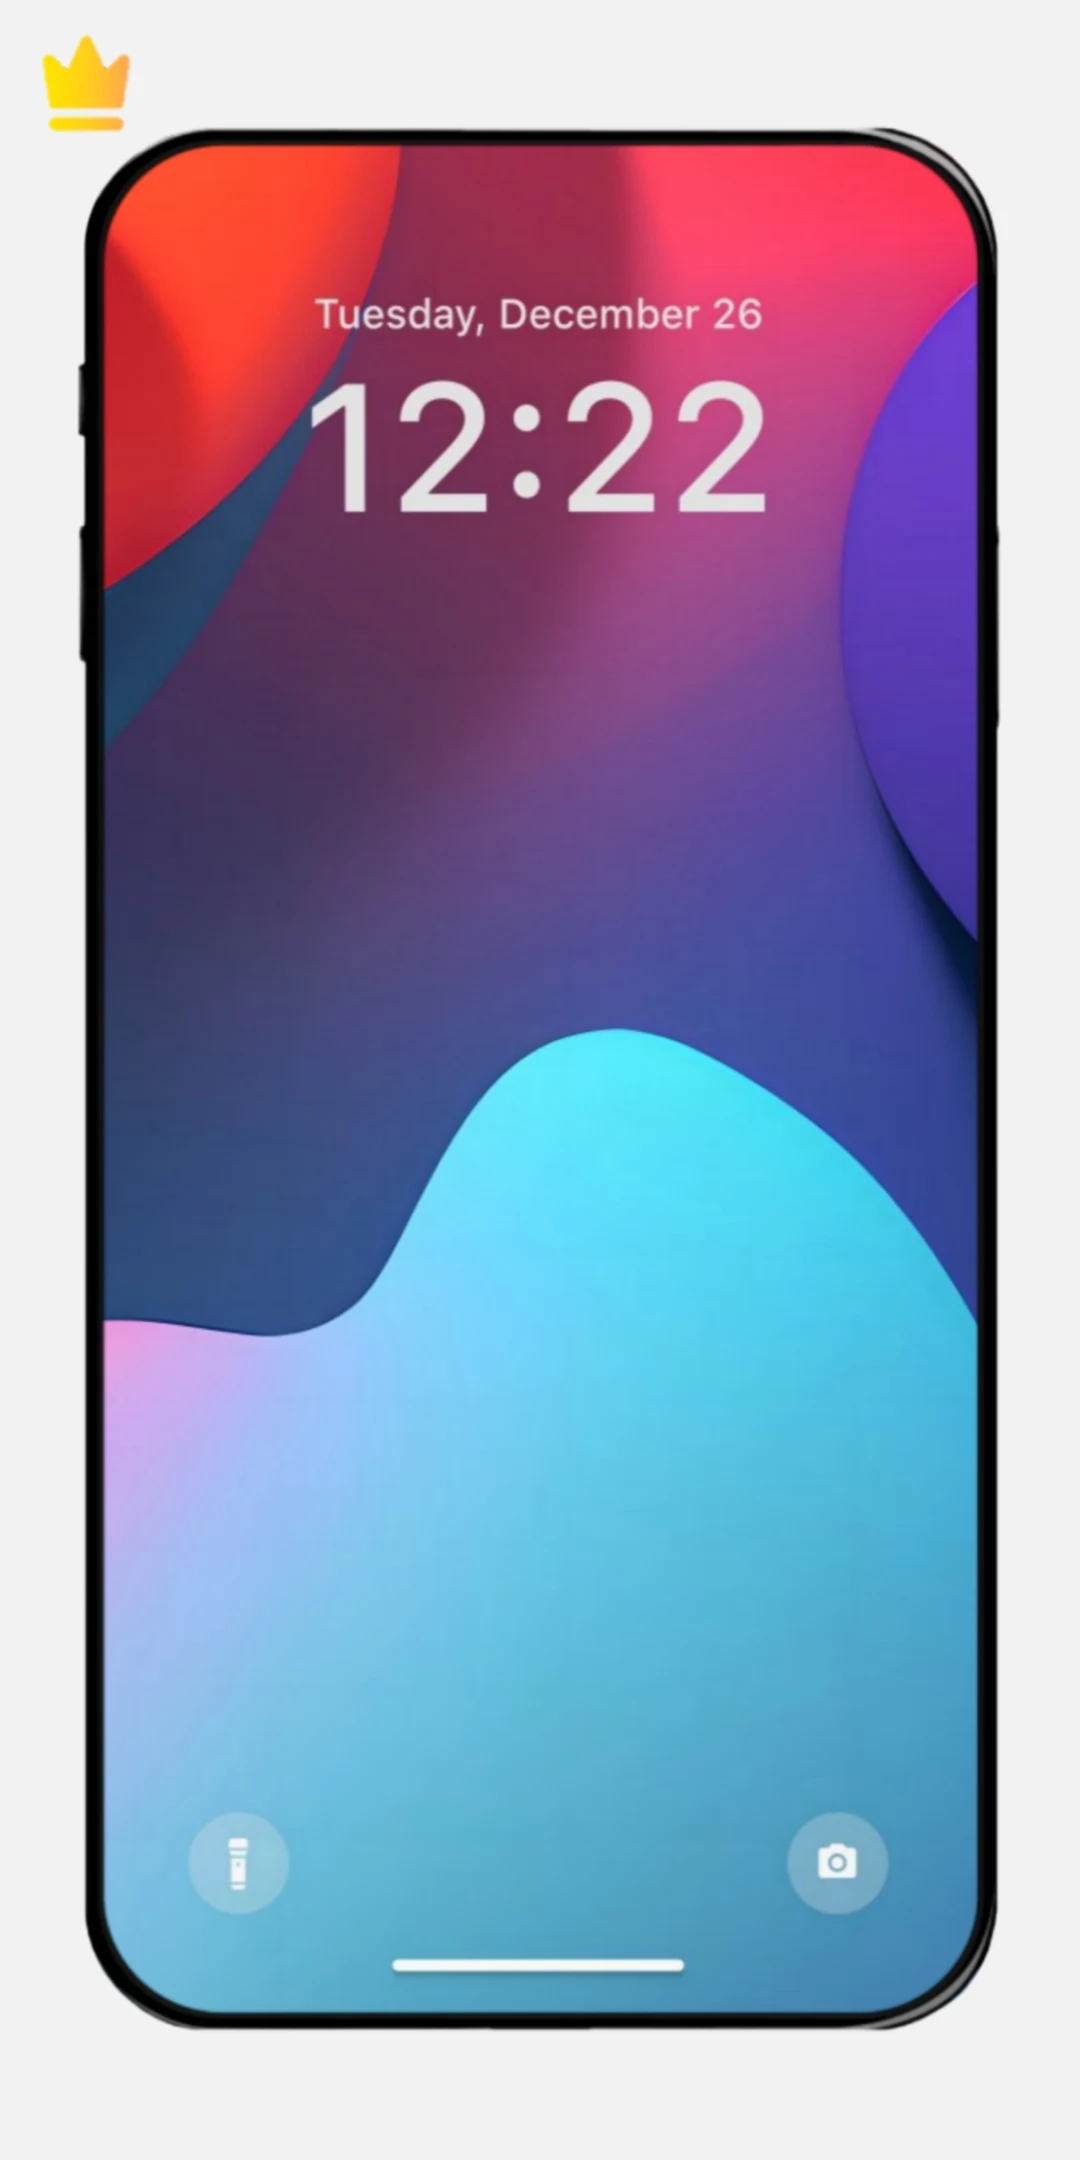 Abstract iPhone wallpaper - 0100